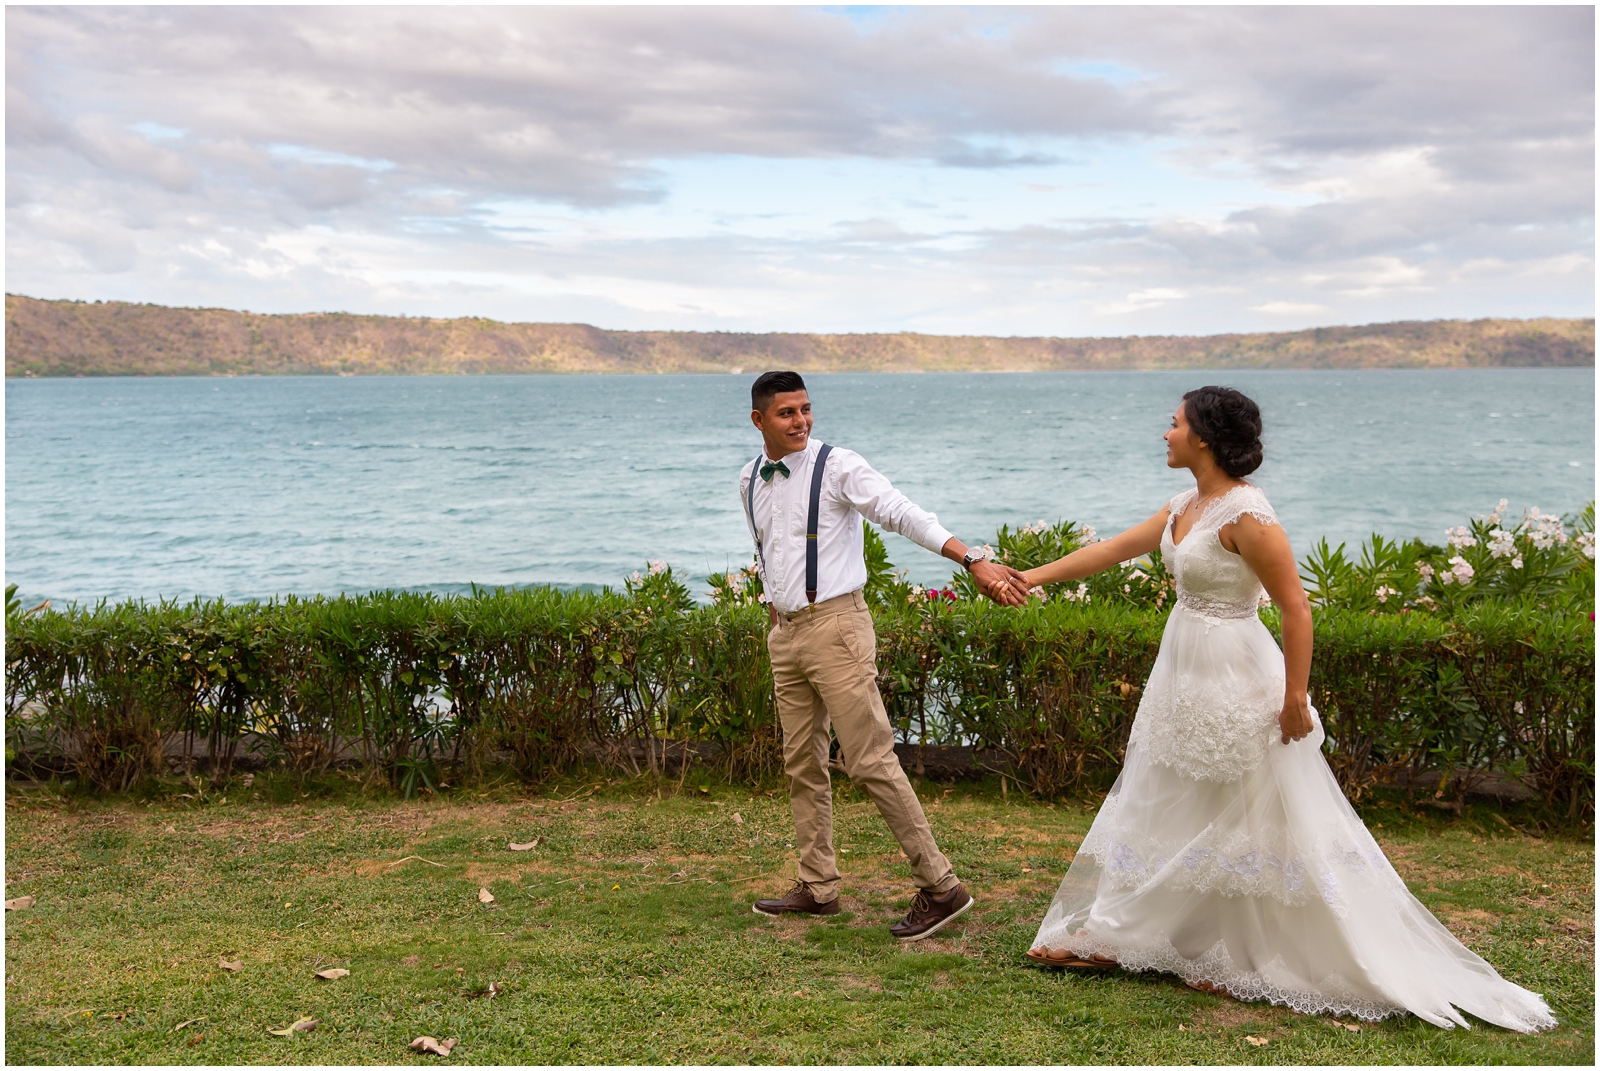 This couple got married at an airbnb overlooking a lagoon in Nicaragua.